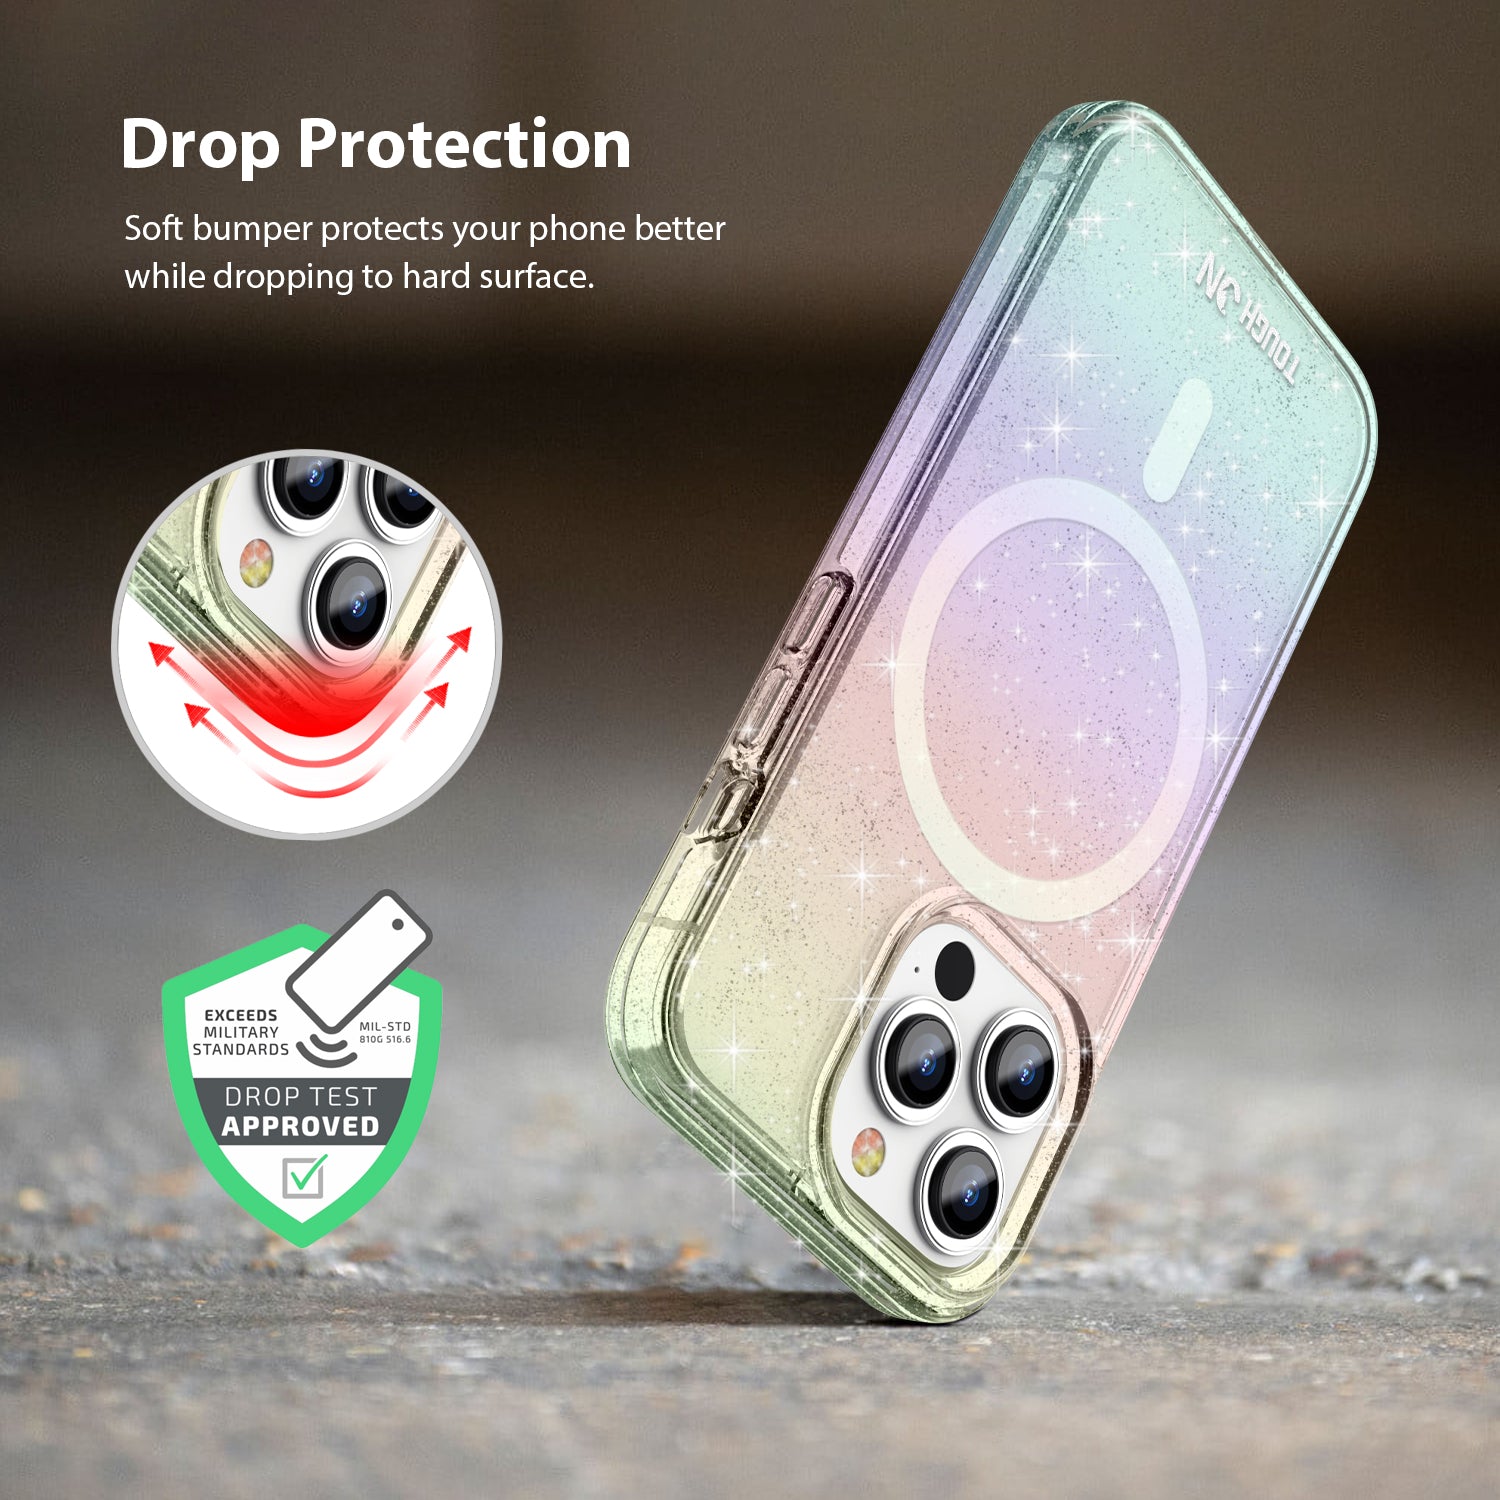 Tough On iPhone 14 Pro Case Glitter Iridescent with Magsafe